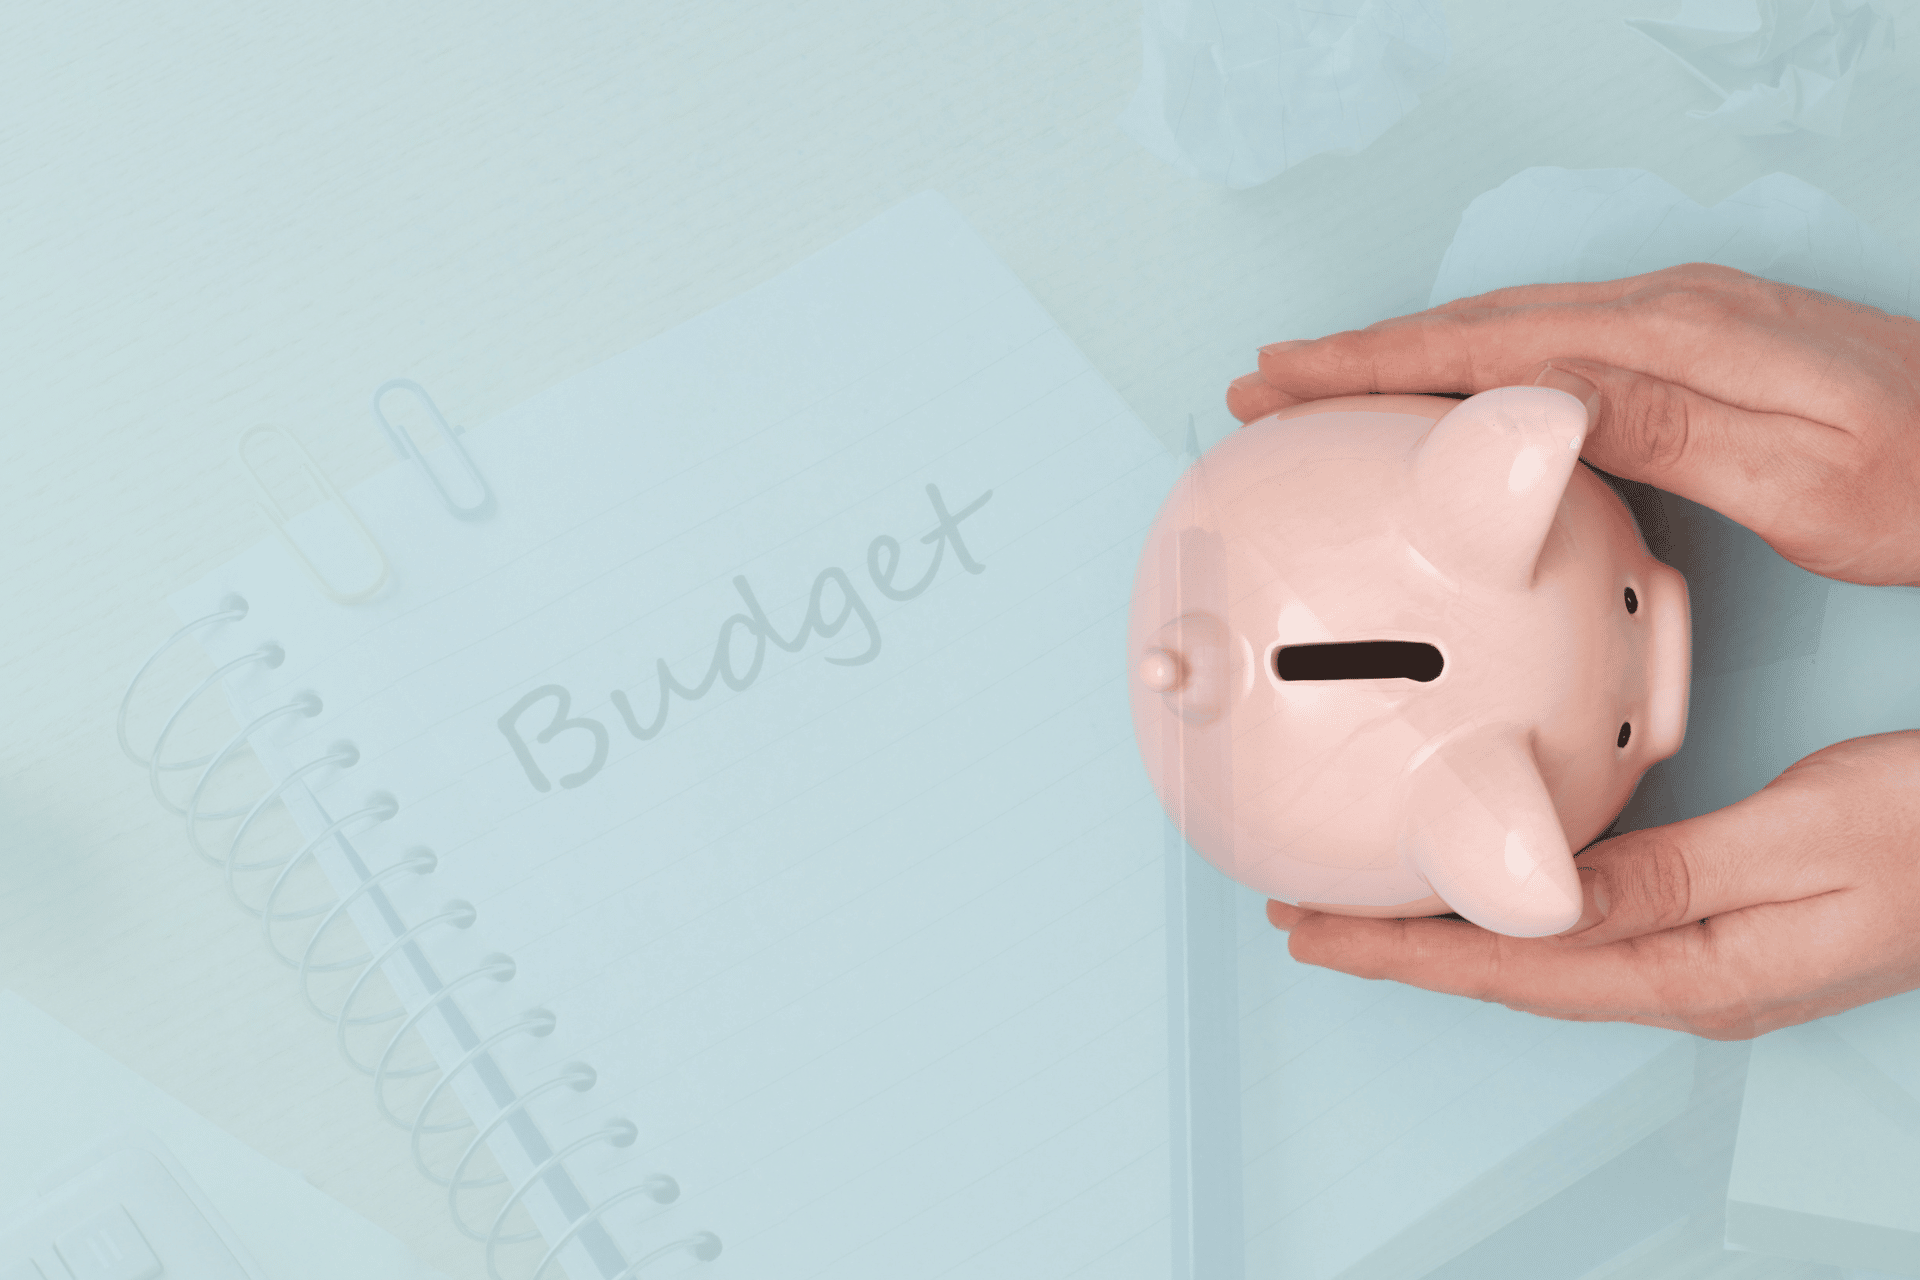 Why You Should Increase, Not Decrease, Your Digital Marketing Budget During Covid-19